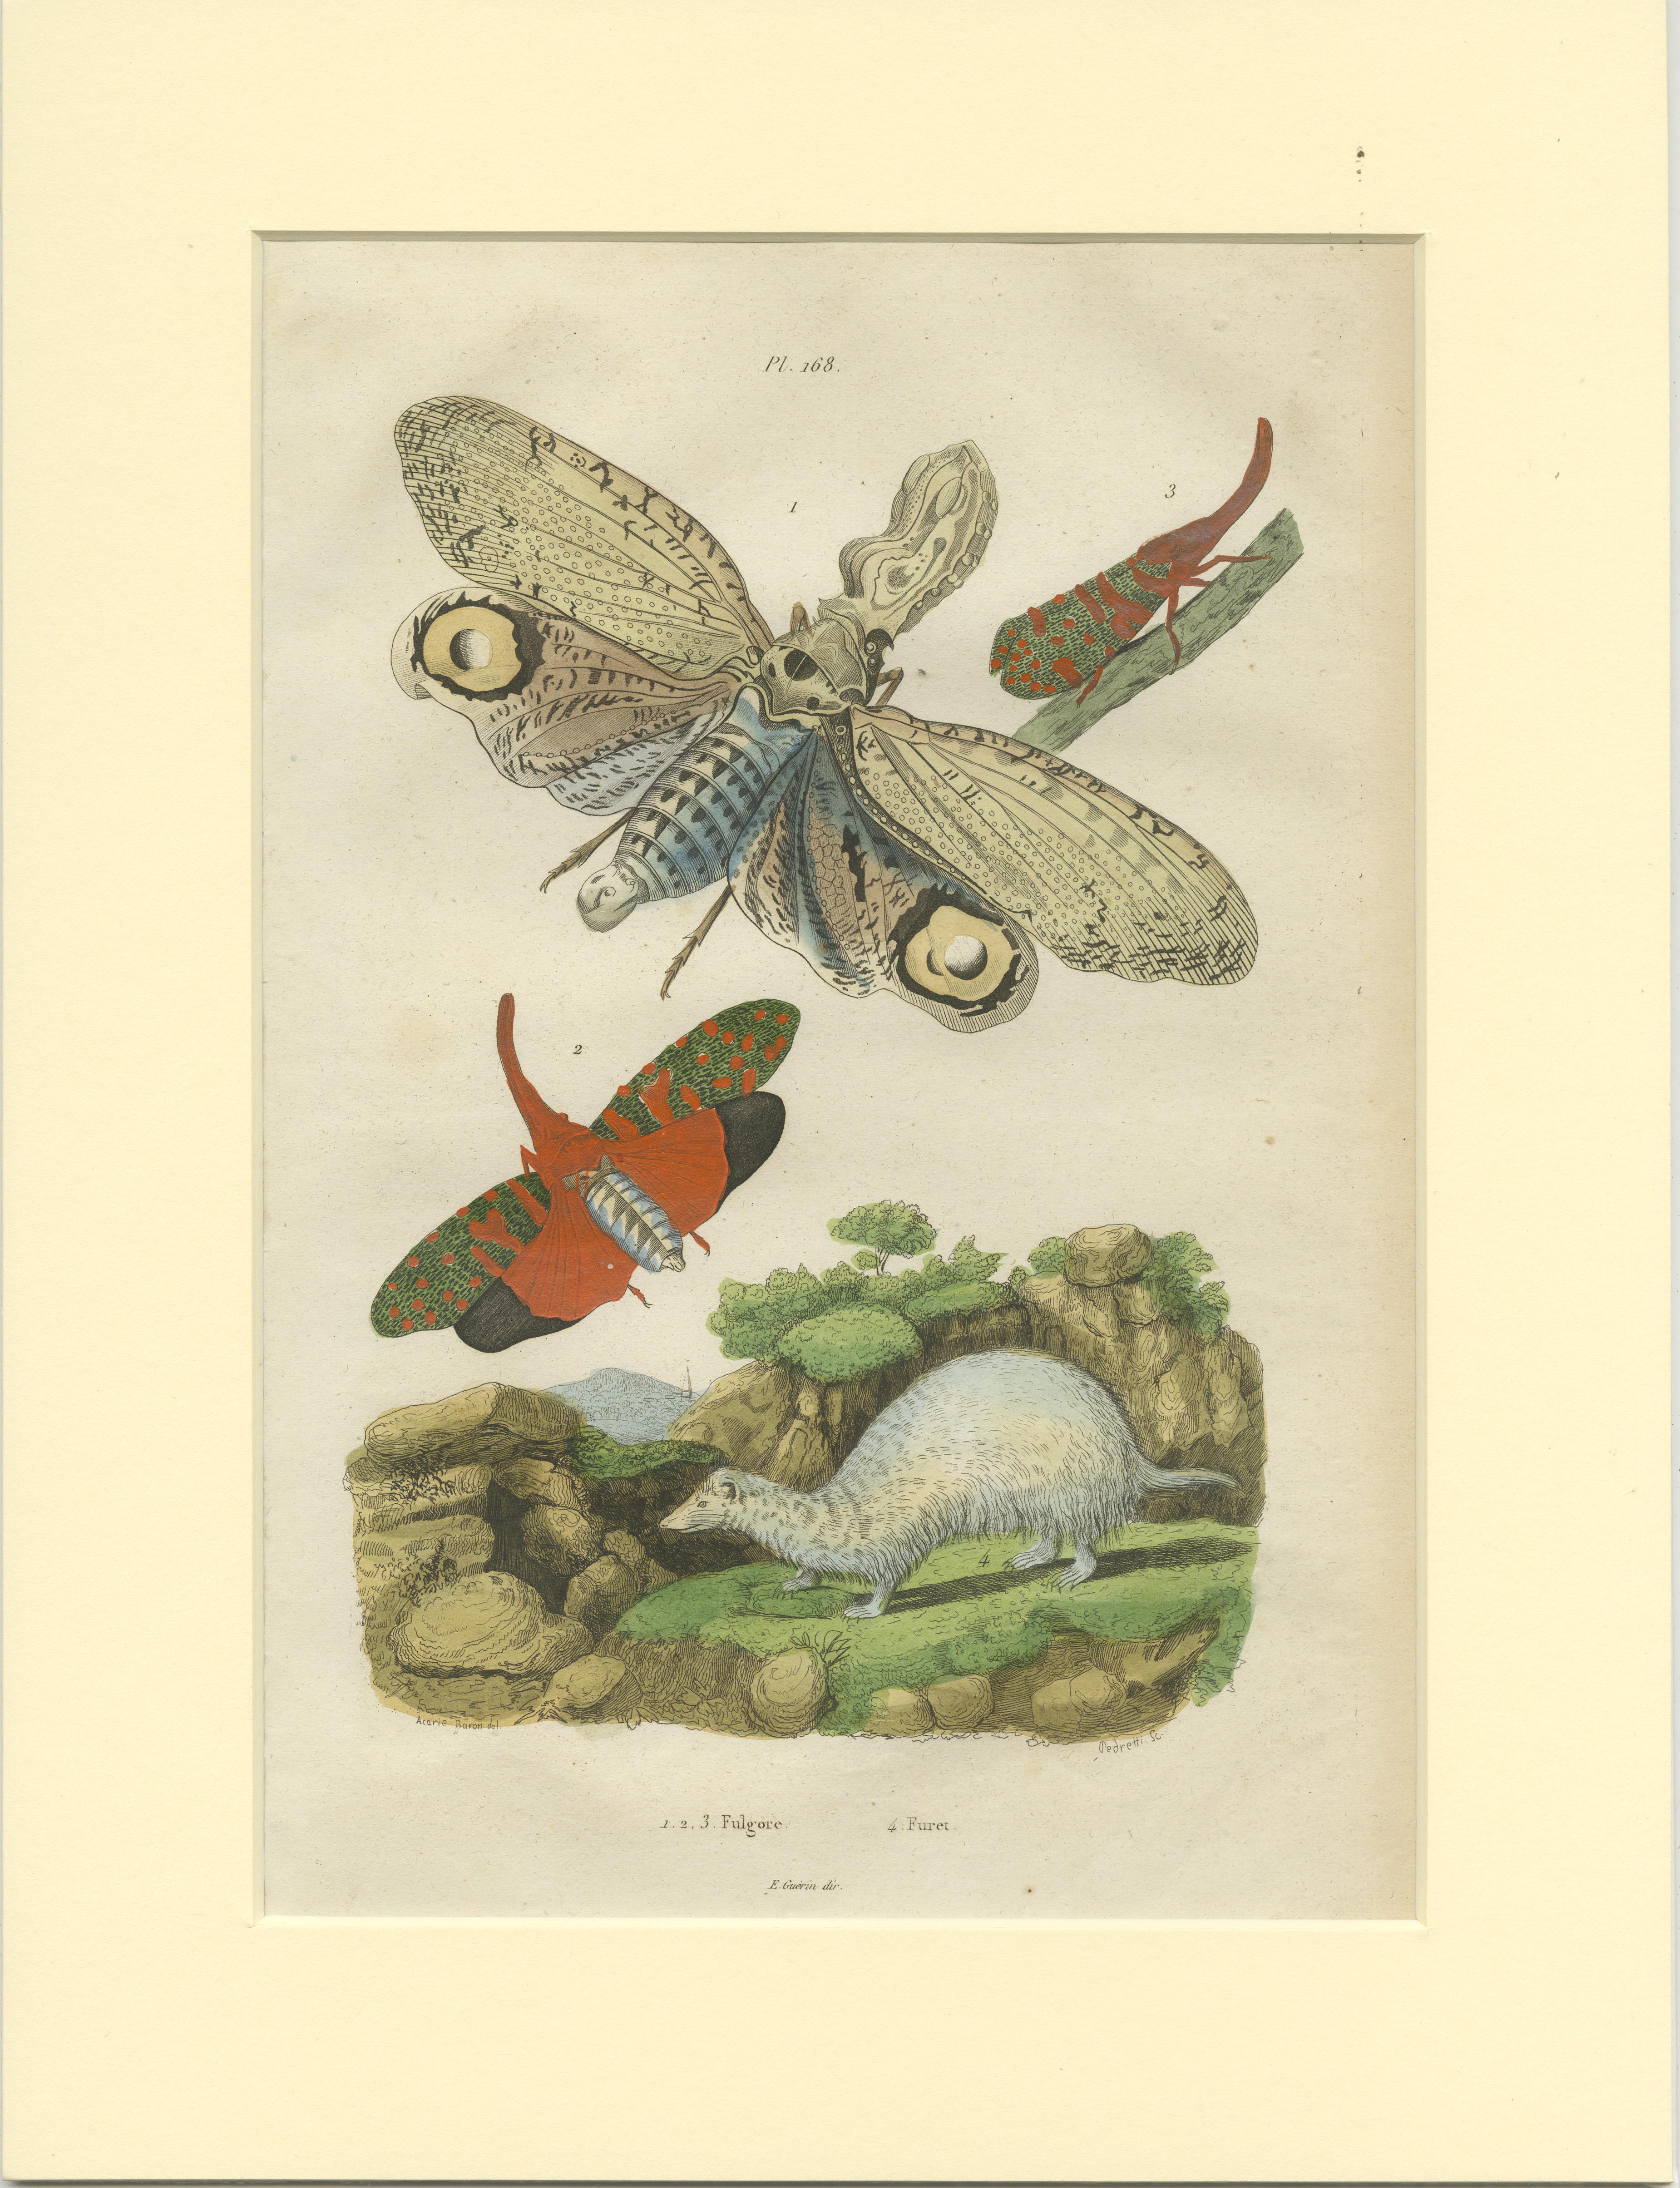 Set of 2 antique butterfly prints of the black witch and other moths. These prints originate from 'Dictionnaire pittoresque d'Histoire Naturelle' by Adolph Felix-Edouard Guerin-Meneville de frites. Published in Paris, 1834-39.

Passepartout /